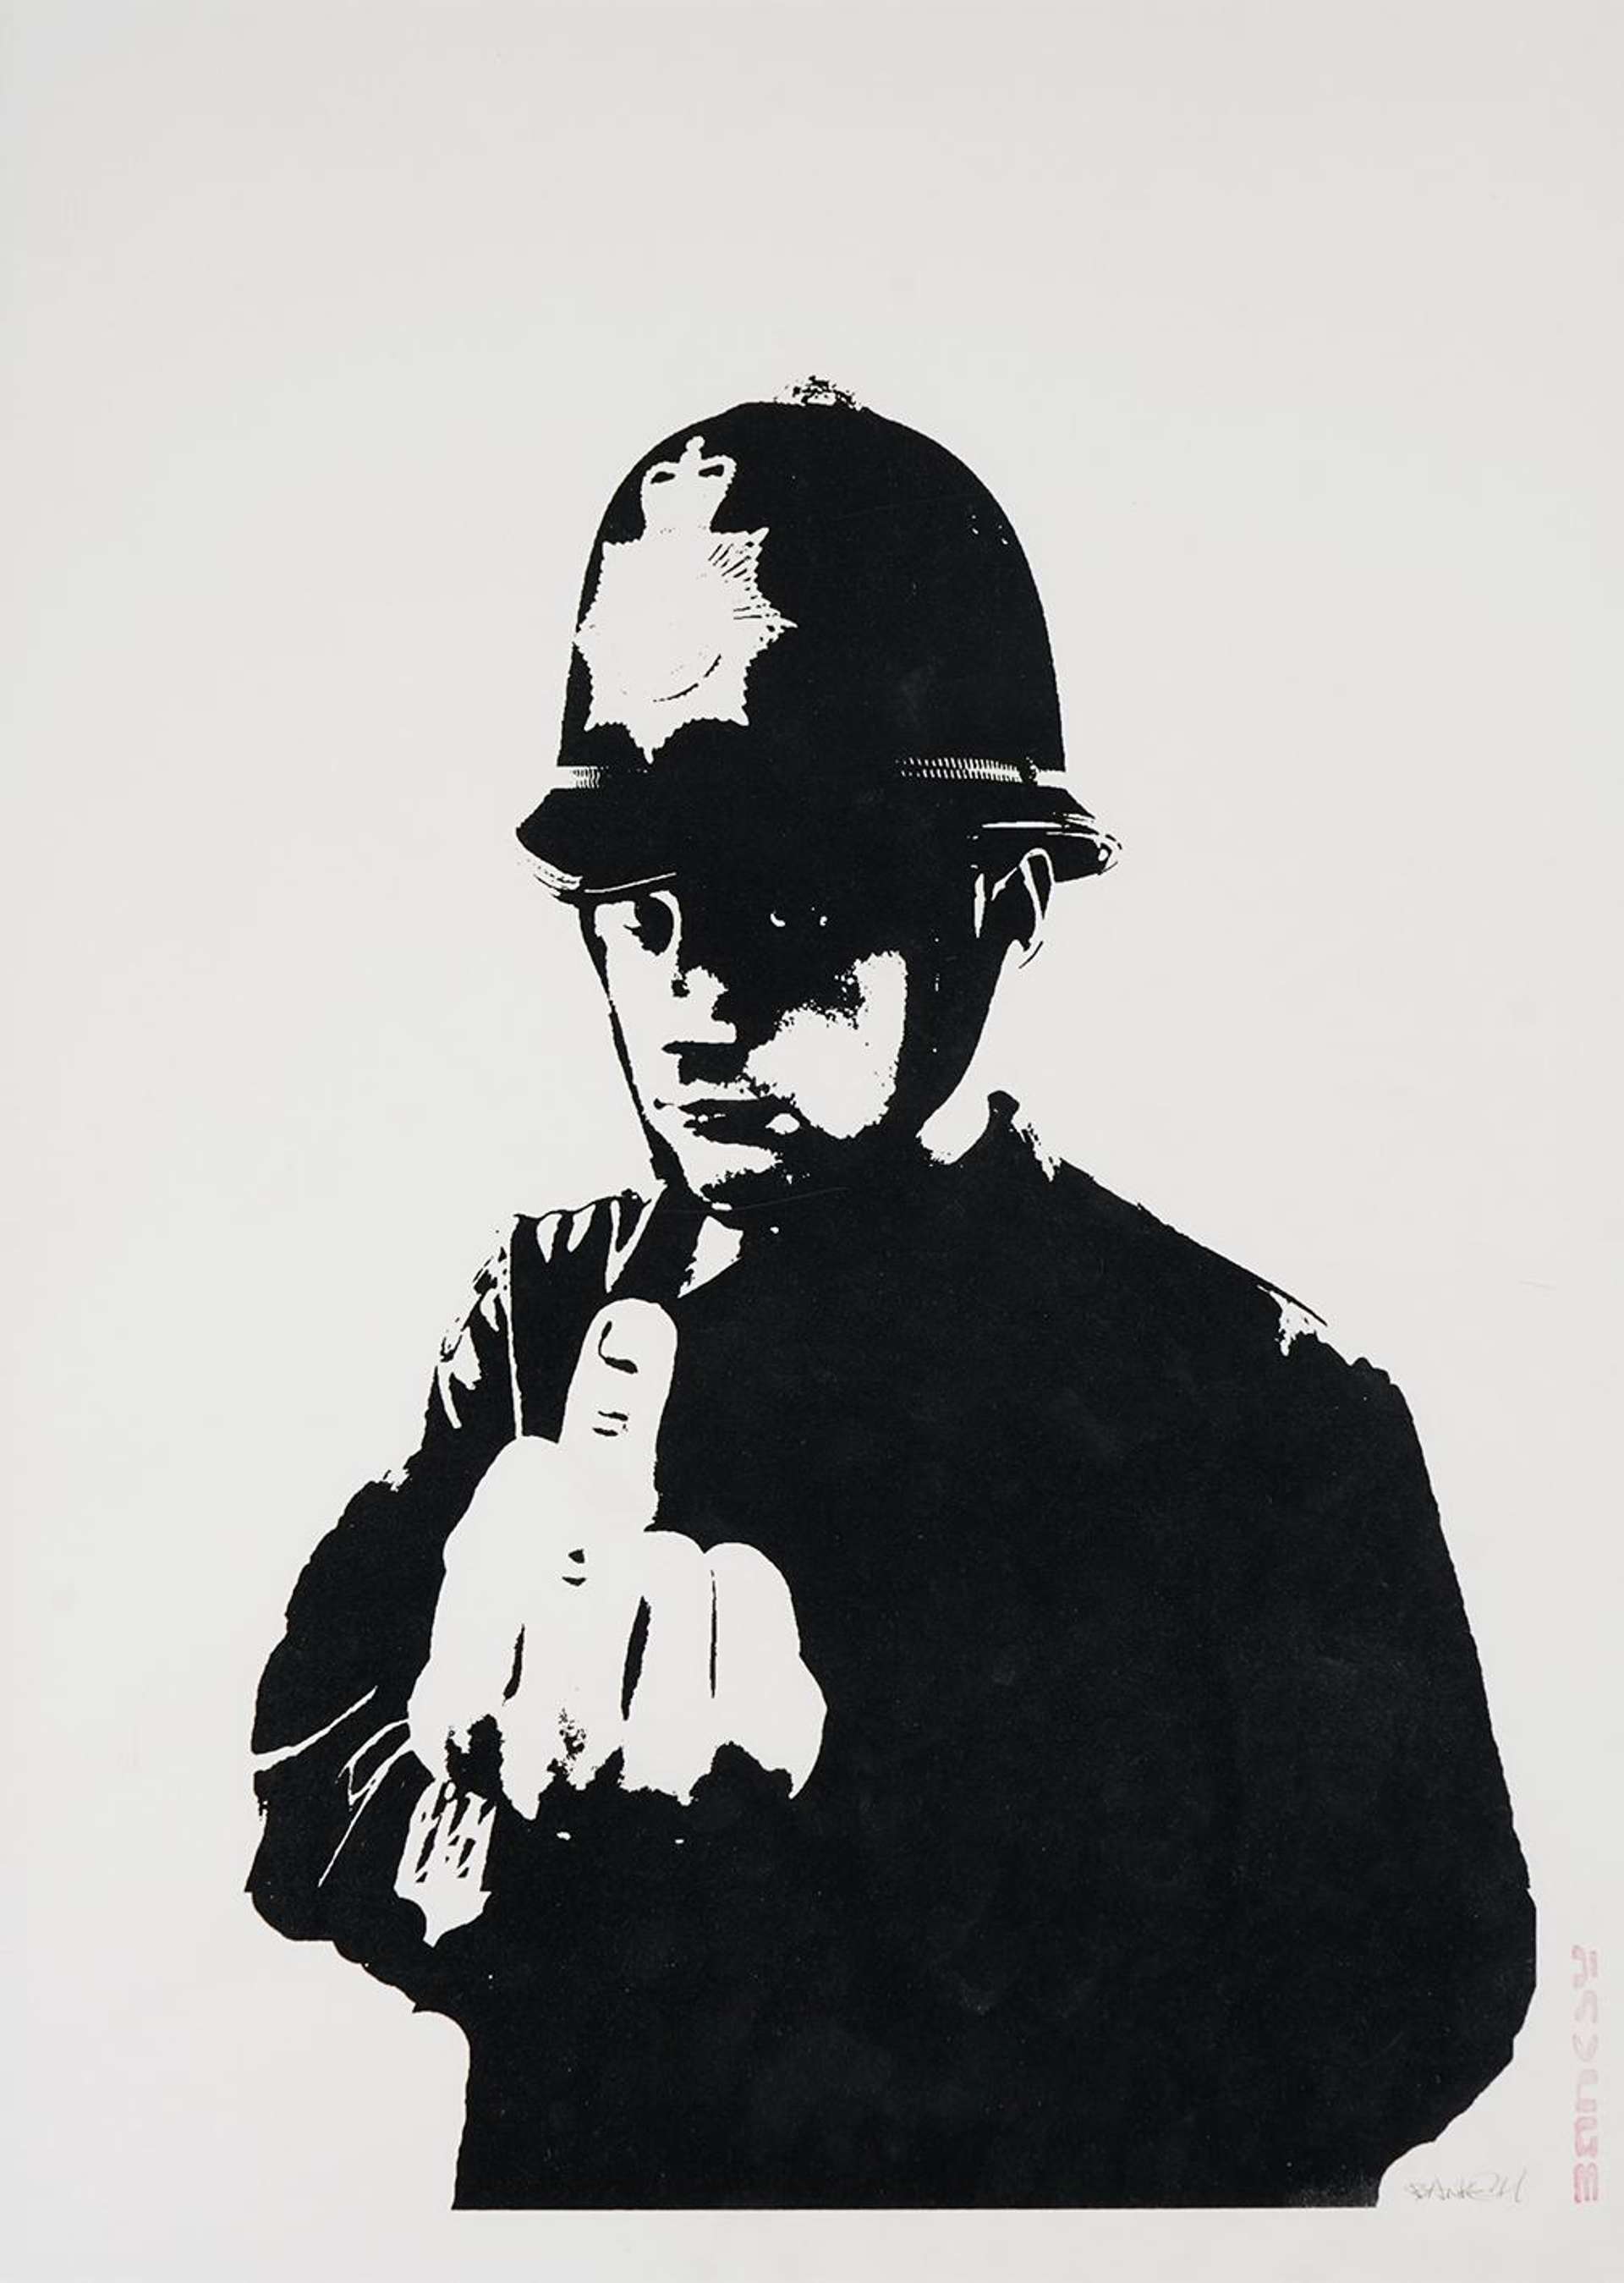  A black and white Banksy screenprint depicting a police officer in English police attire making an offensive hand gesture toward the viewer.